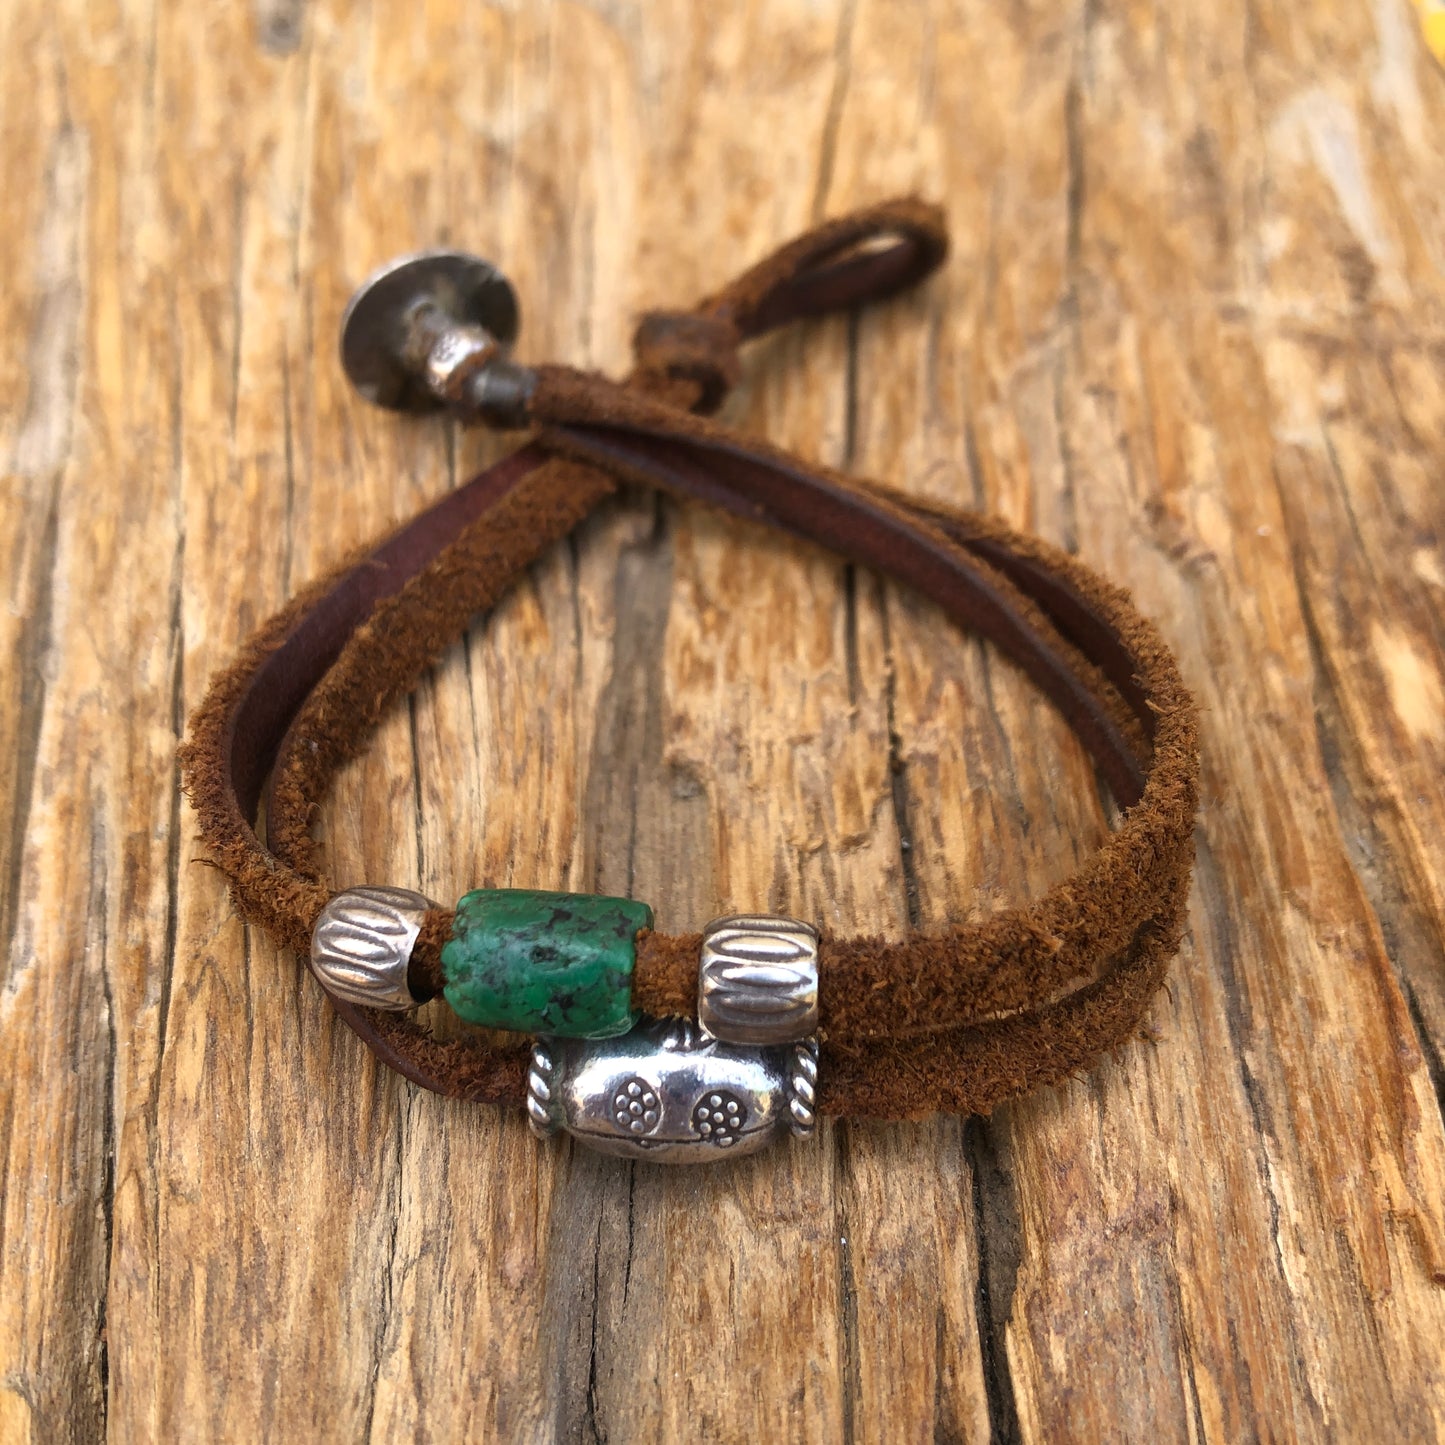 Silver Beads & Turquoise On Brown Leather Bracelet